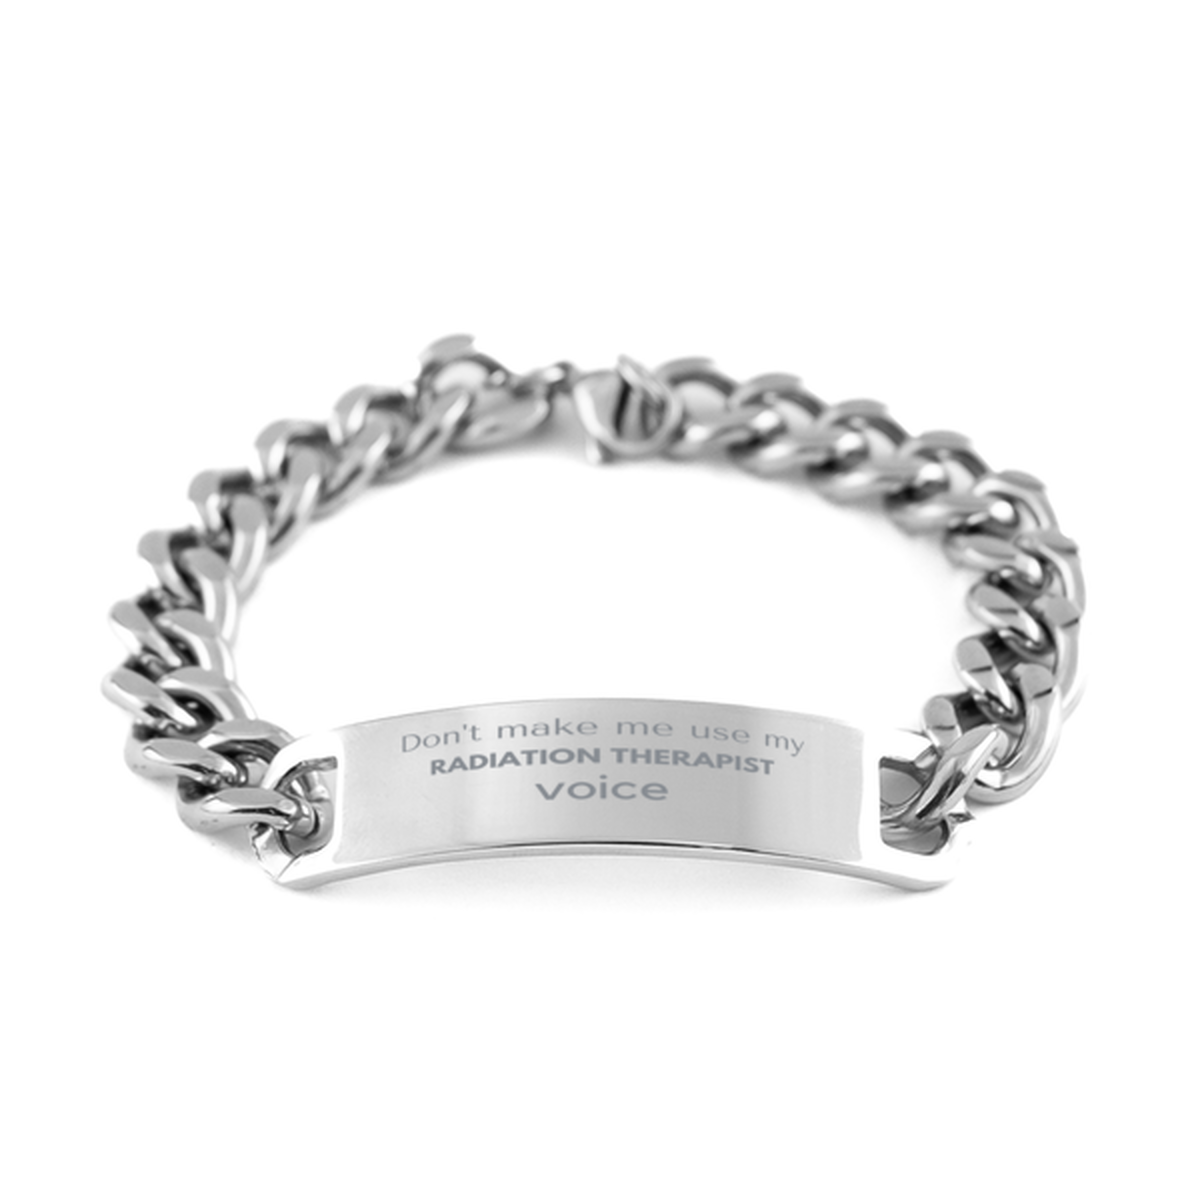 Don't make me use my Radiation Therapist voice, Sarcasm Radiation Therapist Gifts, Christmas Radiation Therapist Cuban Chain Stainless Steel Bracelet Birthday Unique Gifts For Radiation Therapist Coworkers, Men, Women, Colleague, Friends